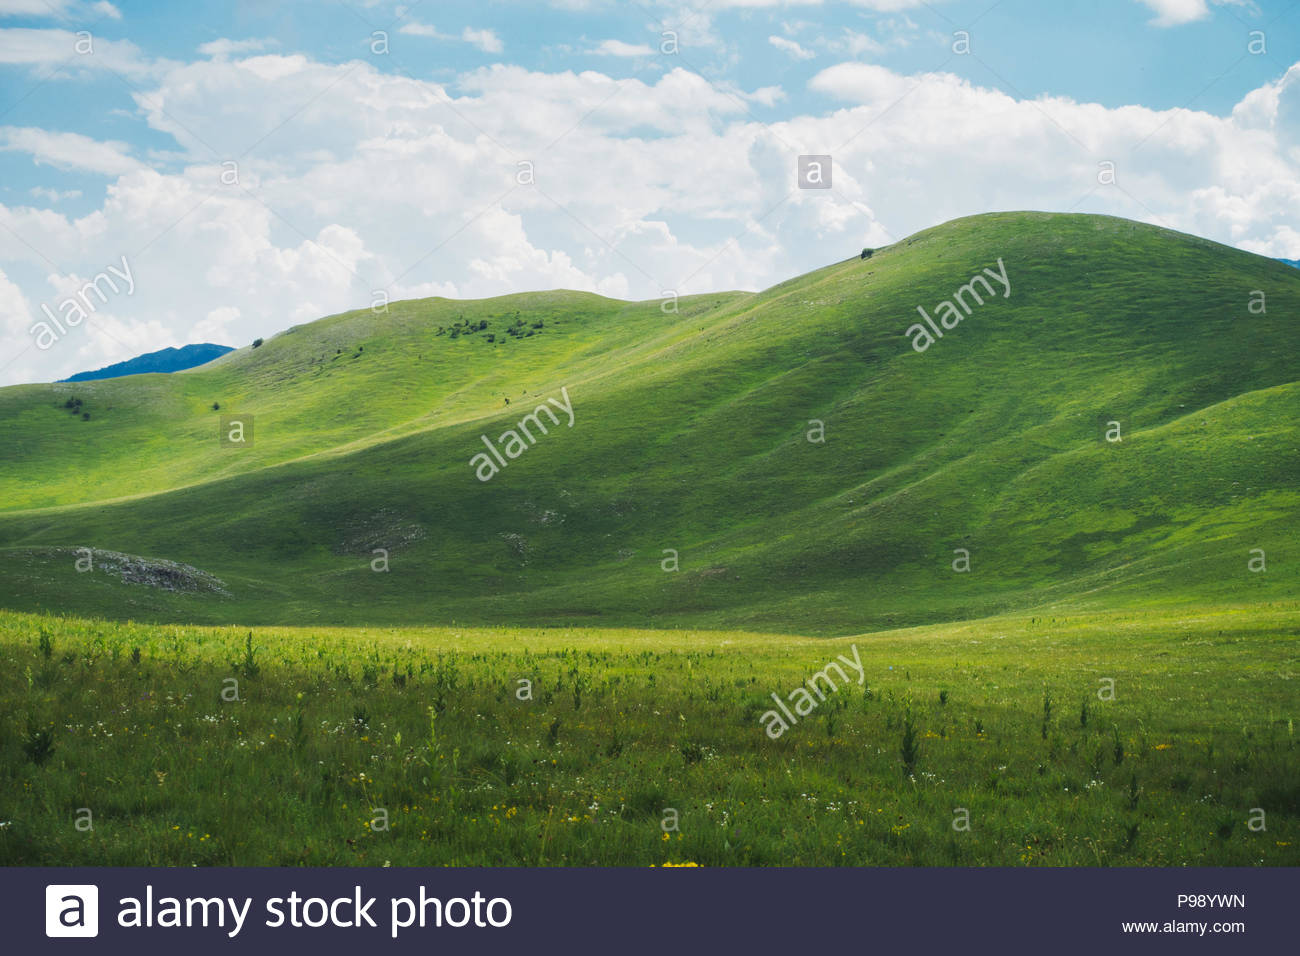 Rolling Green Grassy Hills In Europe Reminiscent Of The Famous